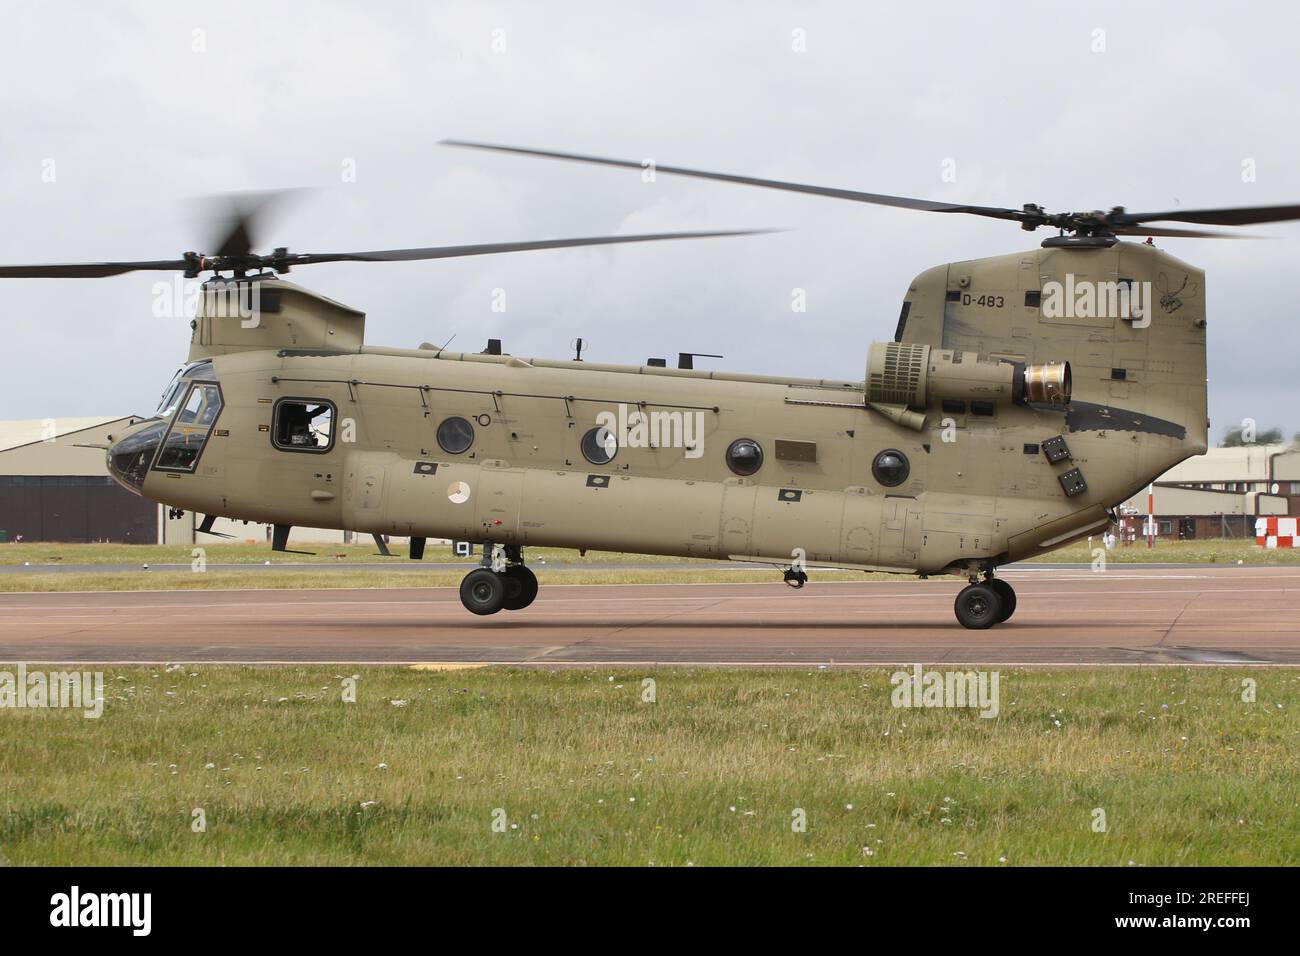 D-483, a Boeing CH-47F Chinook heavy-lift helicopter operated by the Royal Netherlands Air Force (RNLAF), arriving at RAF Fairford in Gloucestershire, England to participate in the Royal International Air Tattoo 2023 (RIAT 2023). Stock Photo